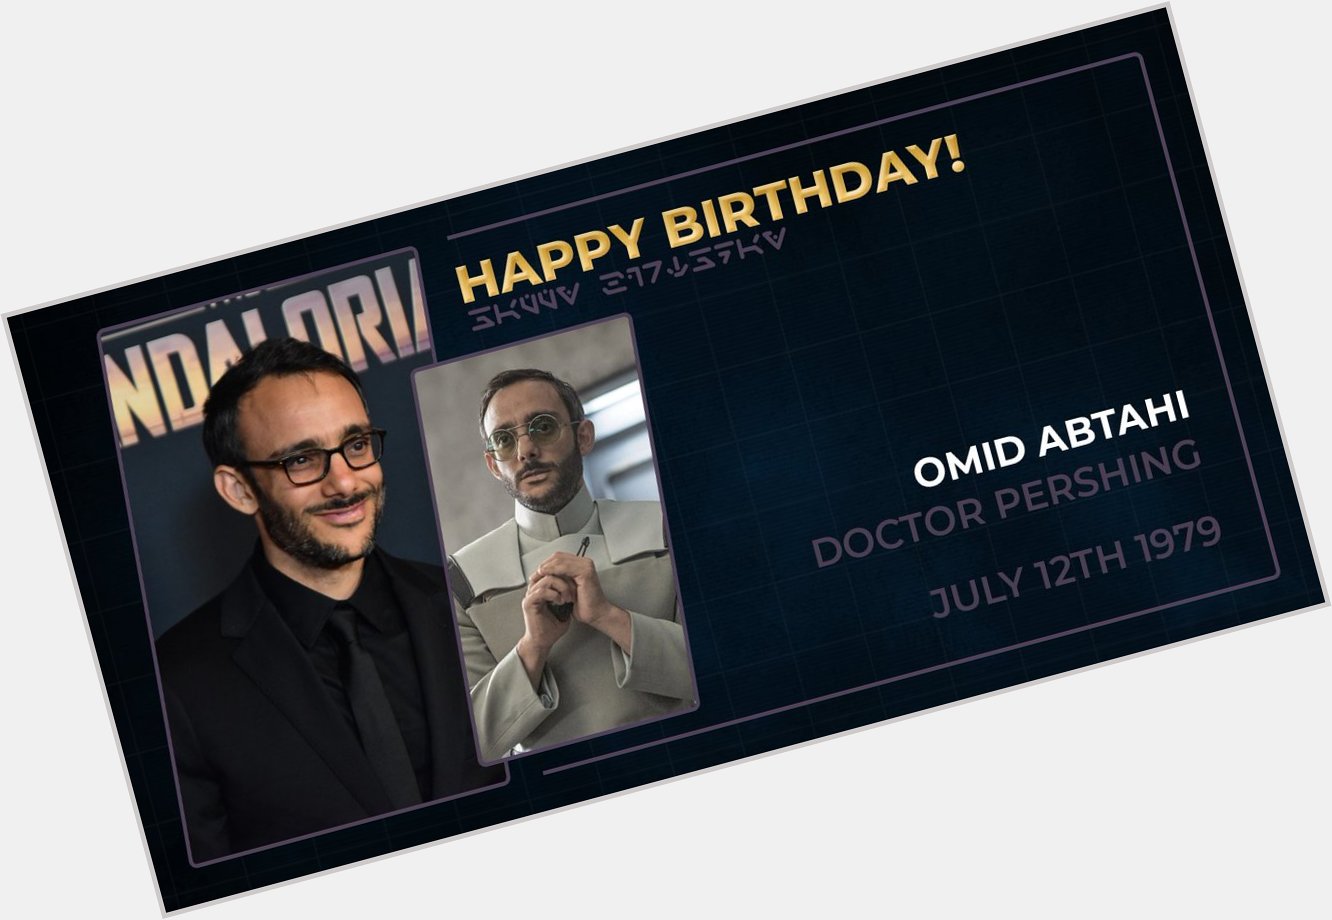 Happy birthday to Omid Abtahi, who played Doctor Pershing in   